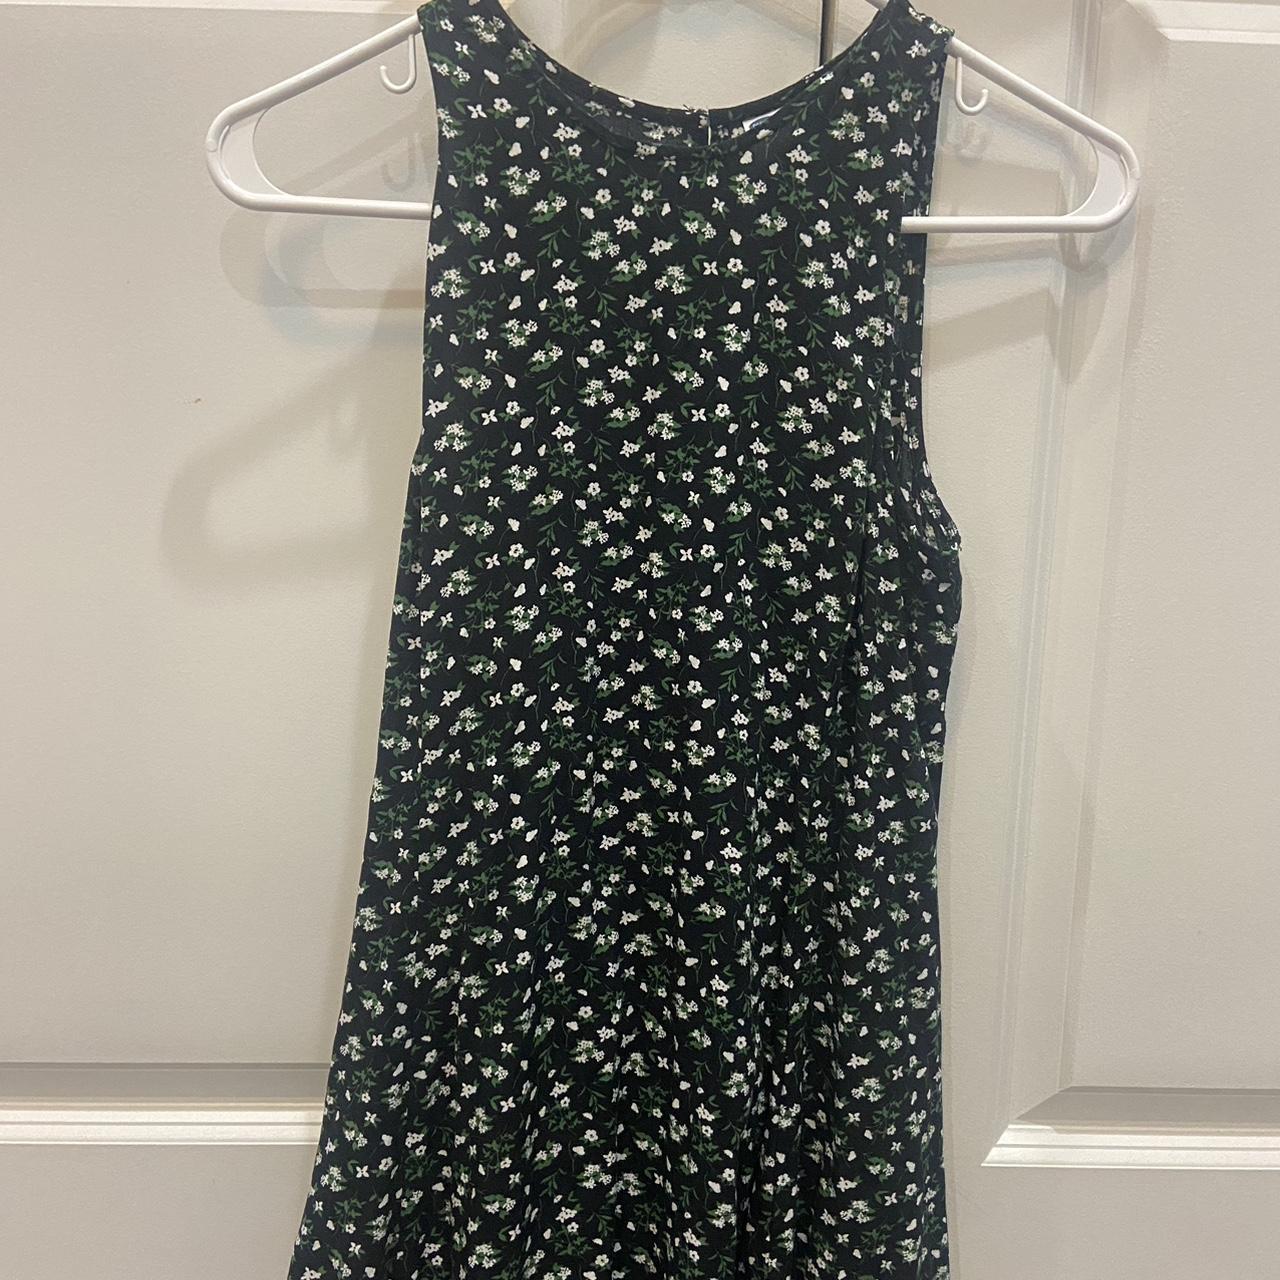 Black floral dress from old navy! Has white and... - Depop